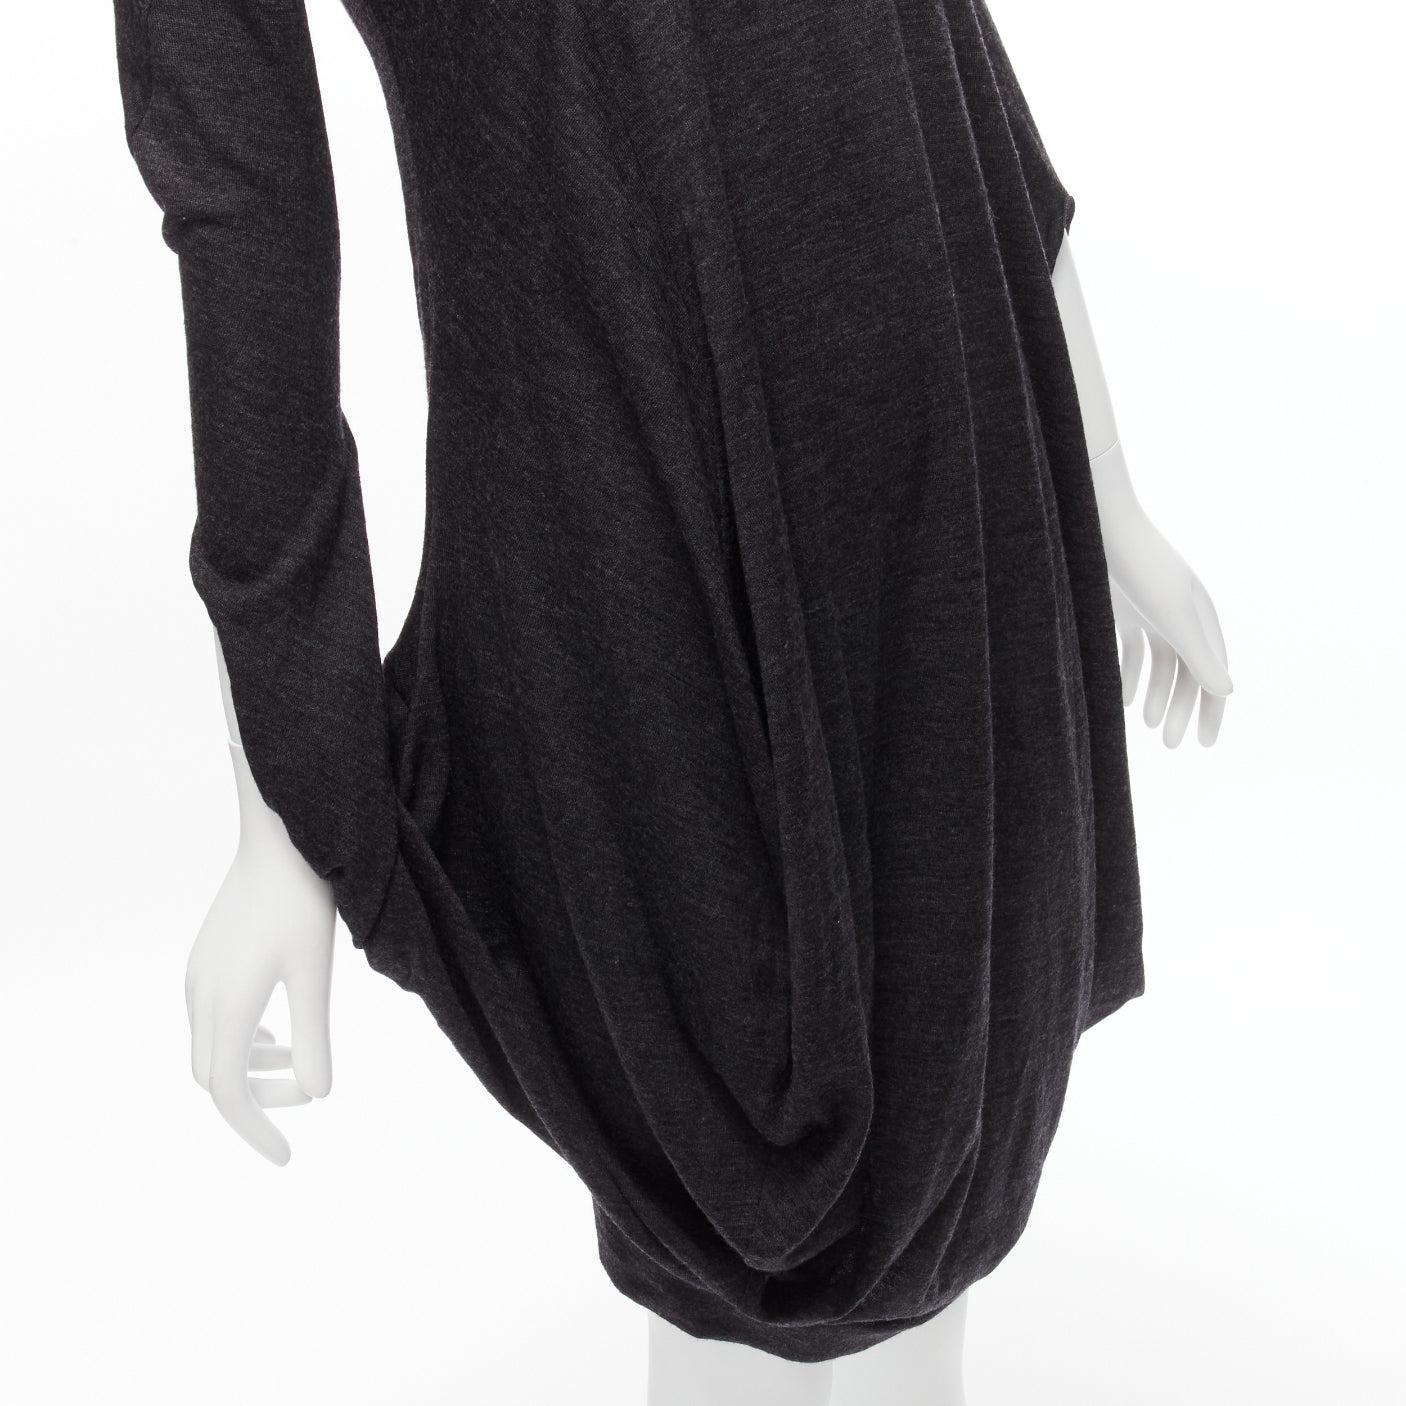 JUNYA WATANABE 2008 100% wool grey asymmetric infinity loop sleeve draped dress XS<br />Reference: CAWG/A00272<br />Brand: Junya watanabe<br />Designer: Junya Watanabe<br />Collection: 2008<br />Material: Wool<br />Color: Grey<br />Pattern: Solid<br